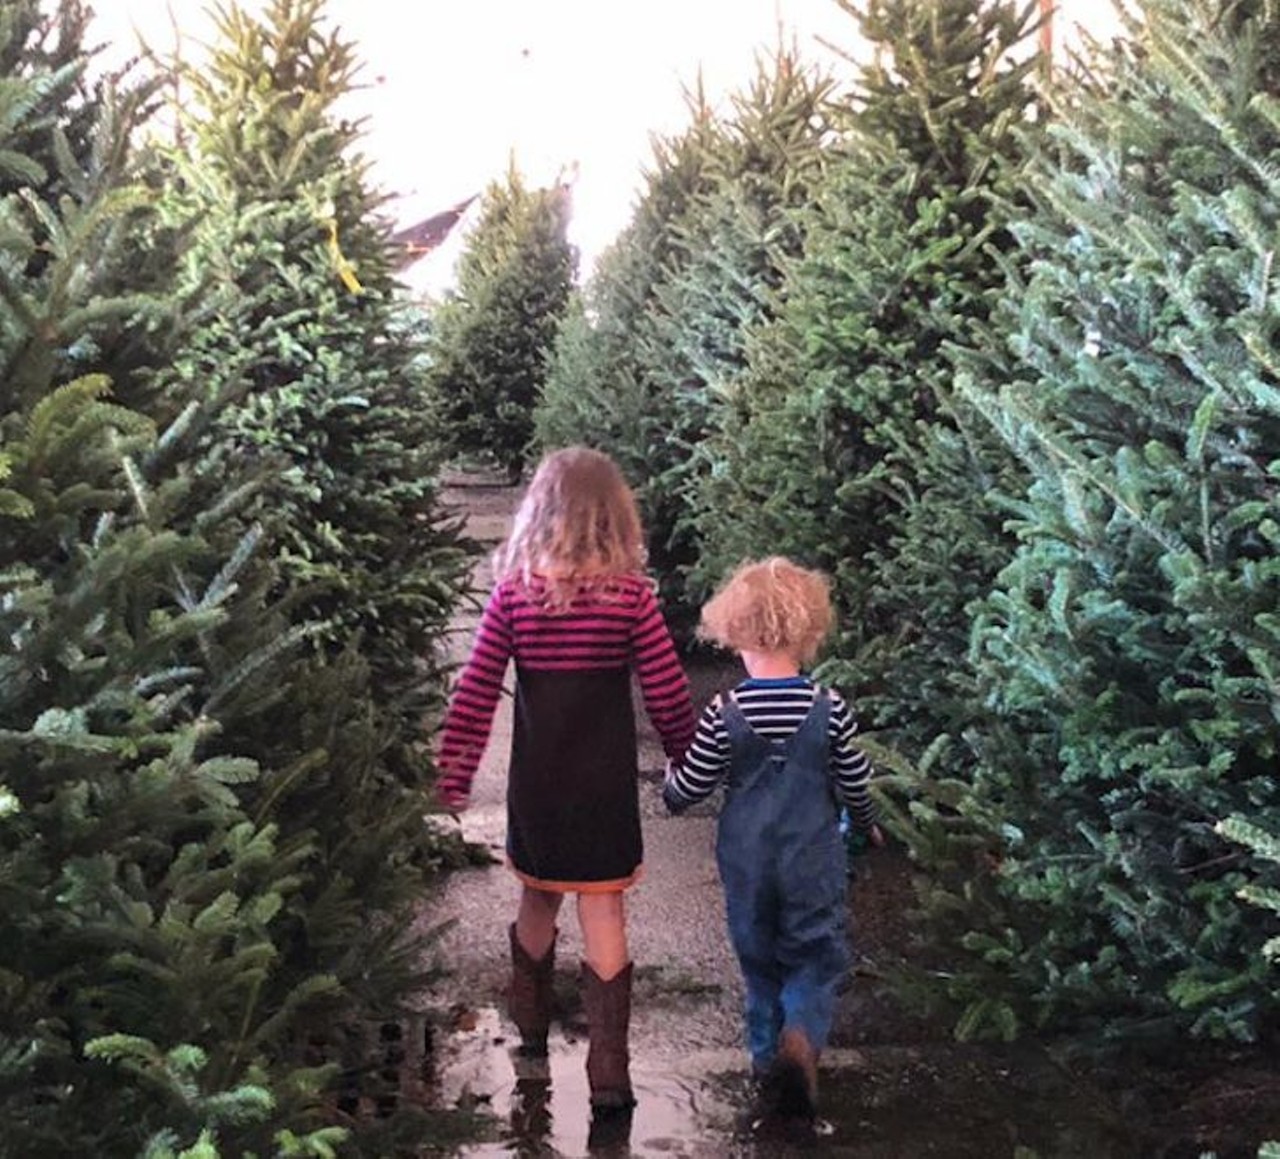 Severt&#146;s Christmas Tree Farm
Multiple locations
With over 40 years of experience, this family-owned farm harvests trees Fraser Fir Christmas trees from North Carolina and Virgina. Locations span across Florida, with Central Florida stores in Winter Springs, Kissimmee and Lake Mary. Open every day with varying hours.
Photo via Severt&#146;s Christmas Tree Farm/Facebook